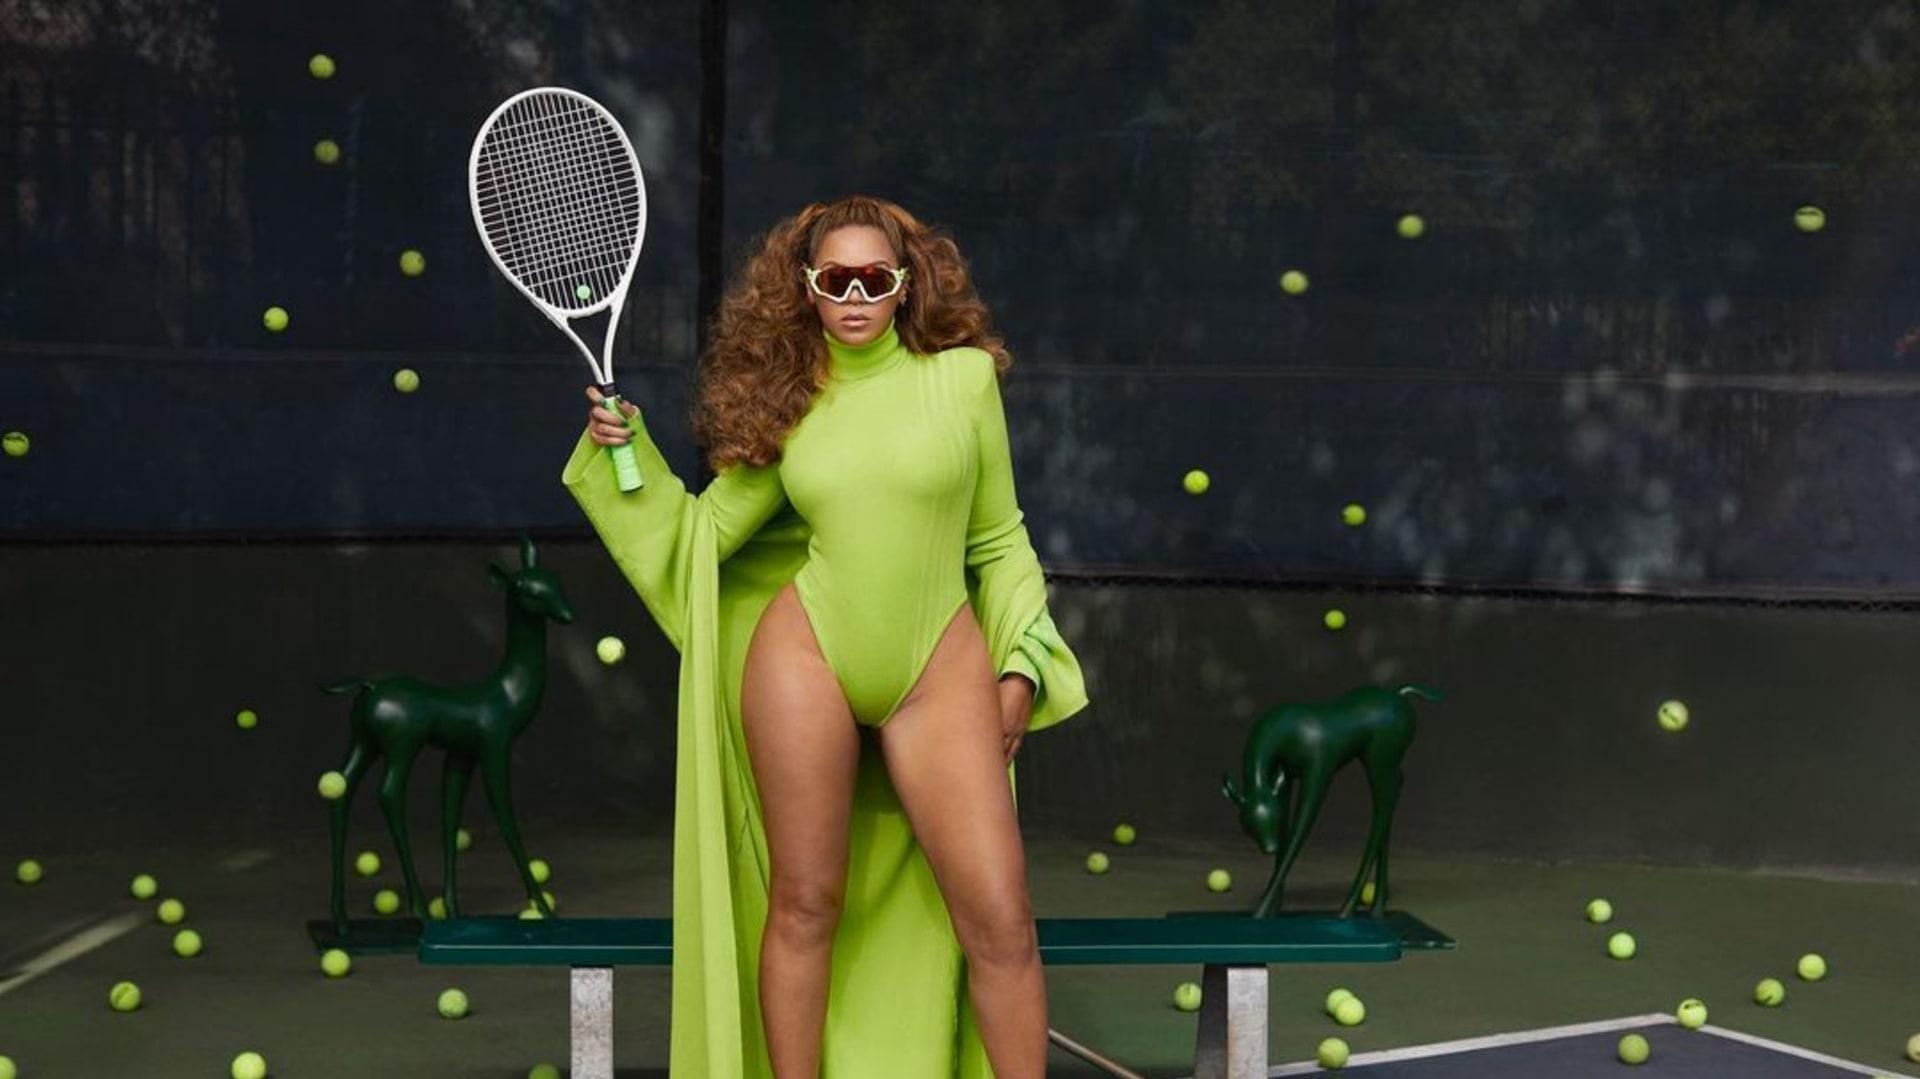 Beyonce Promotes Winter Ivy Park X Adidas Collection On The Tennis